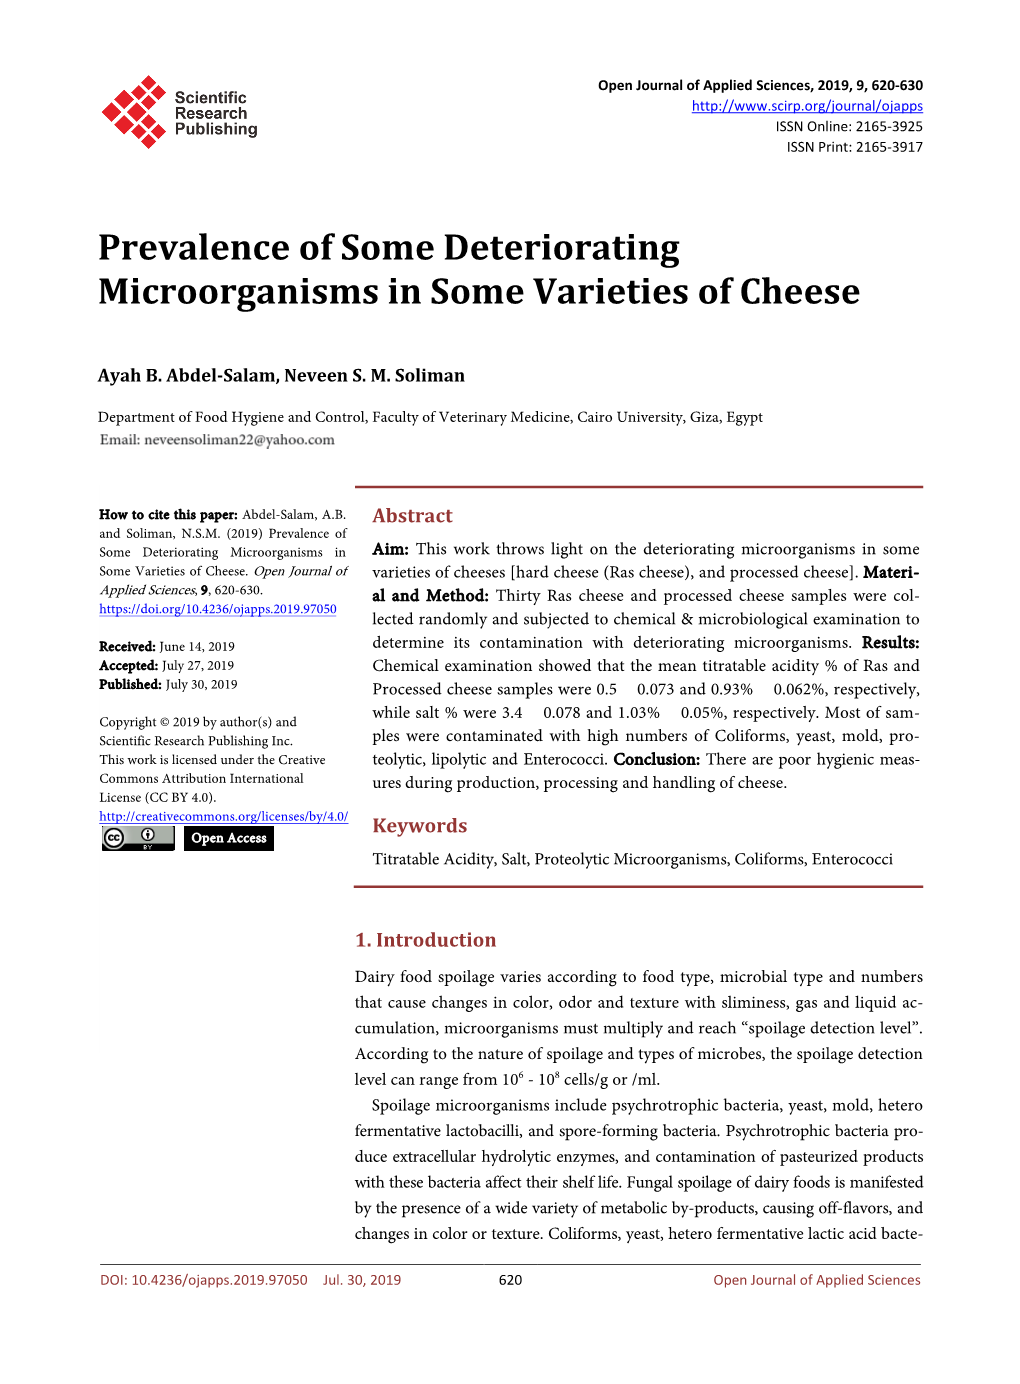 Prevalence of Some Deteriorating Microorganisms in Some Varieties of Cheese